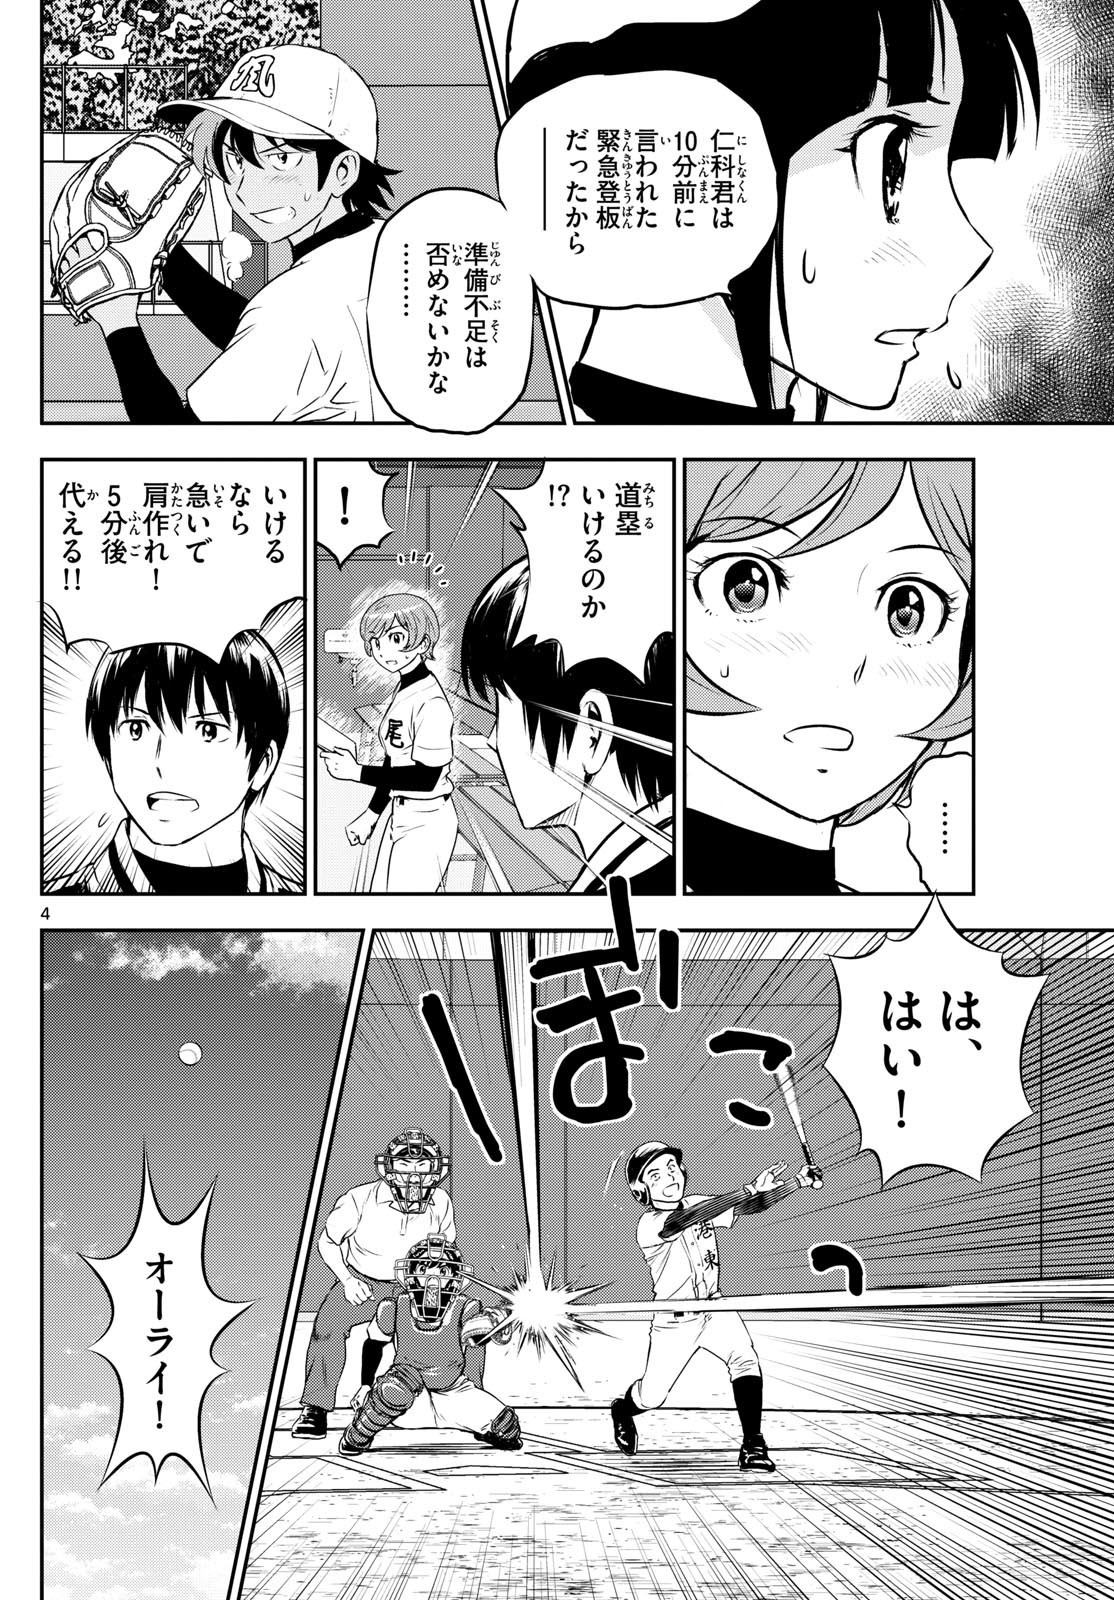 Major 2nd - メジャーセカンド - Chapter 284 - Page 4